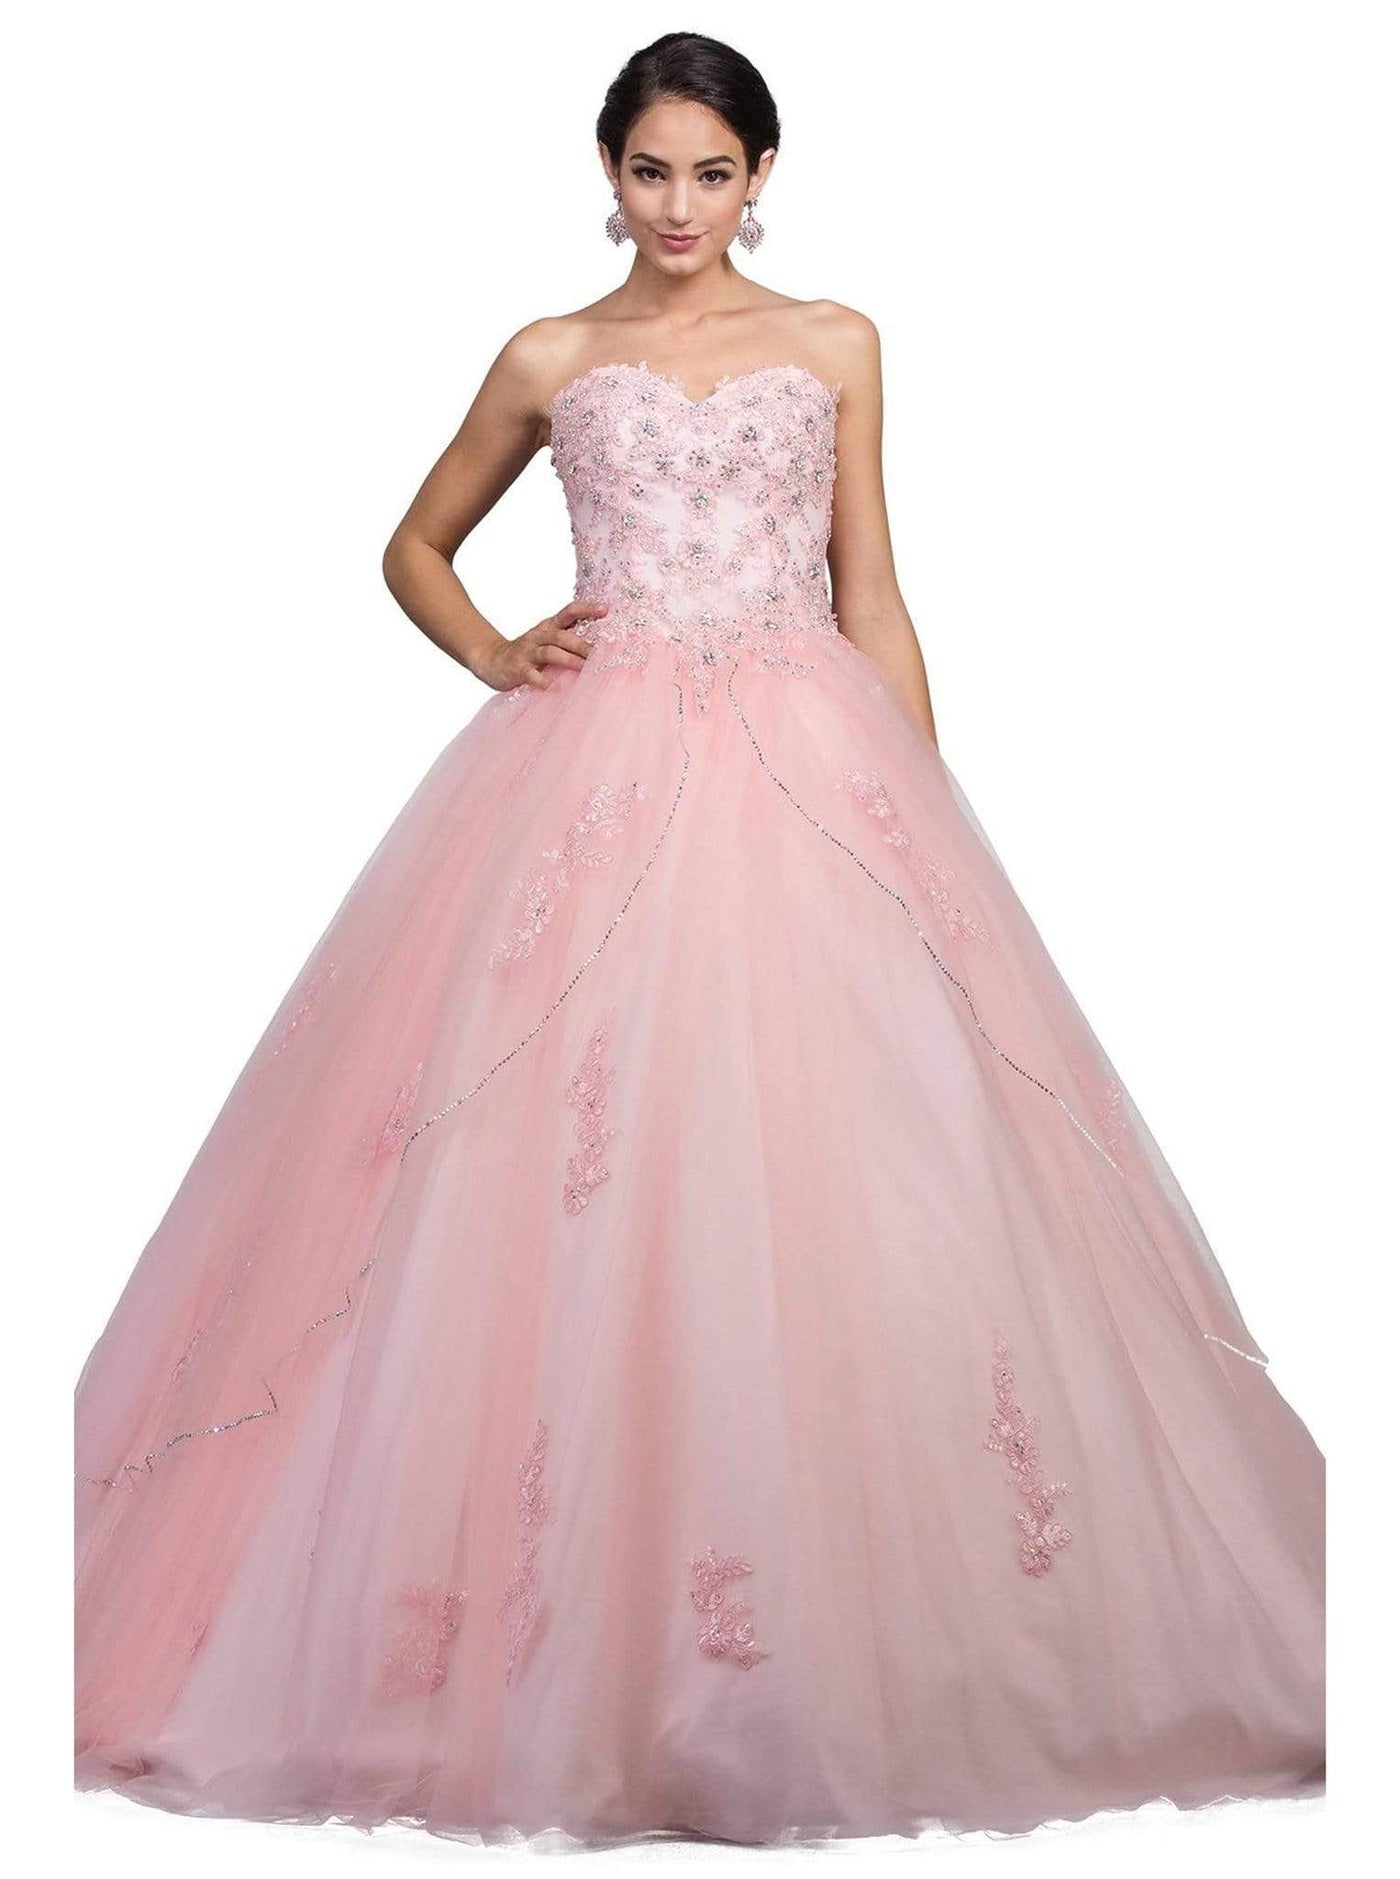 Dancing Queen - 1224 Strapless Sweetheart Lace-up Back Ballgown Special Occasion Dress XS / Blush